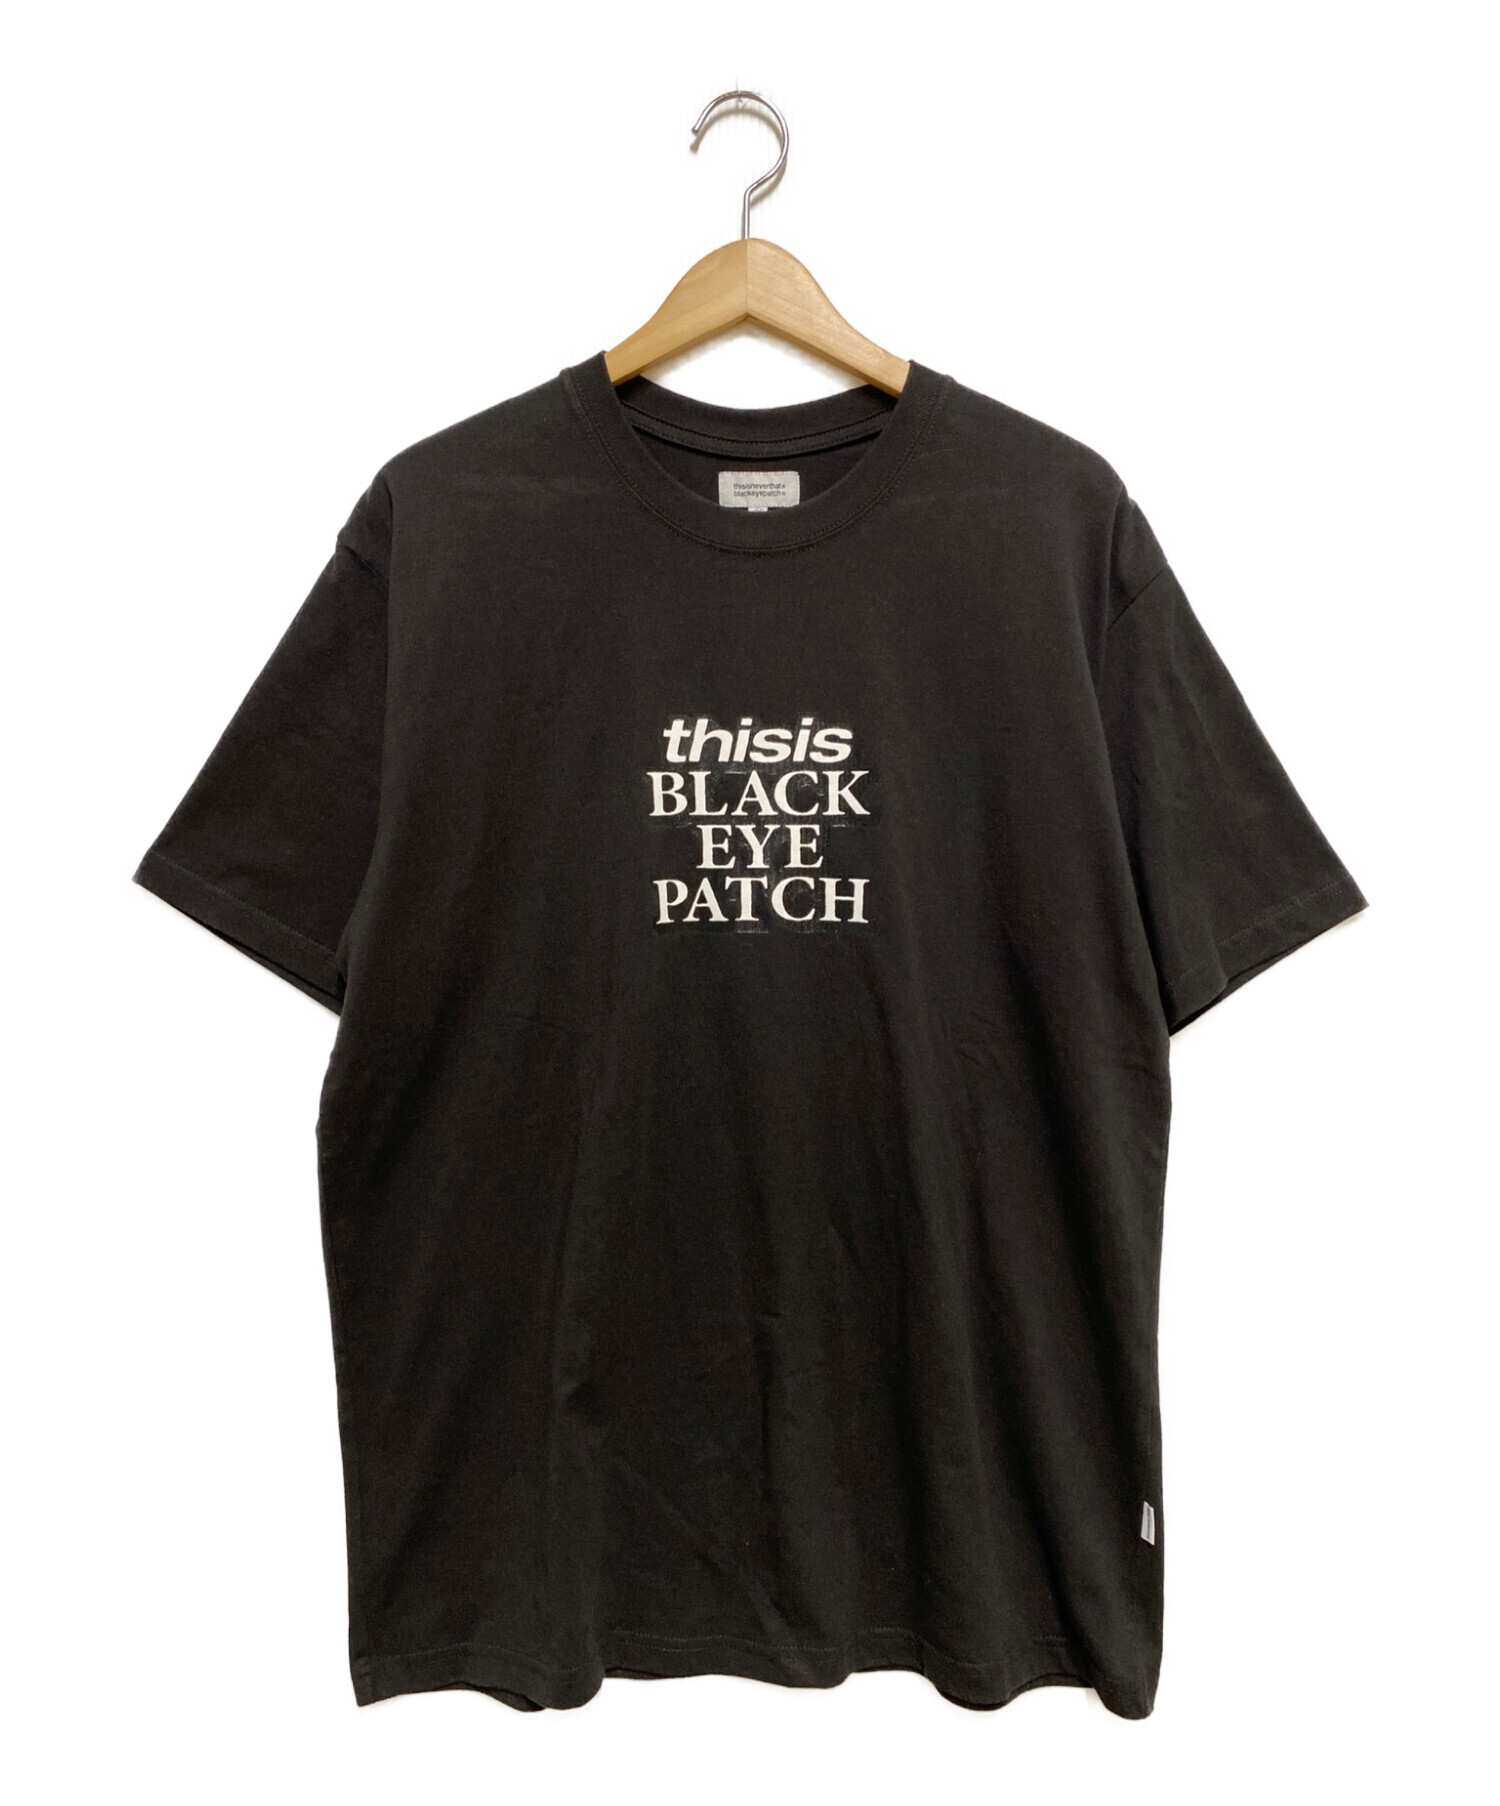 The black eye patch ×This is never that - Tシャツ/カットソー(半袖